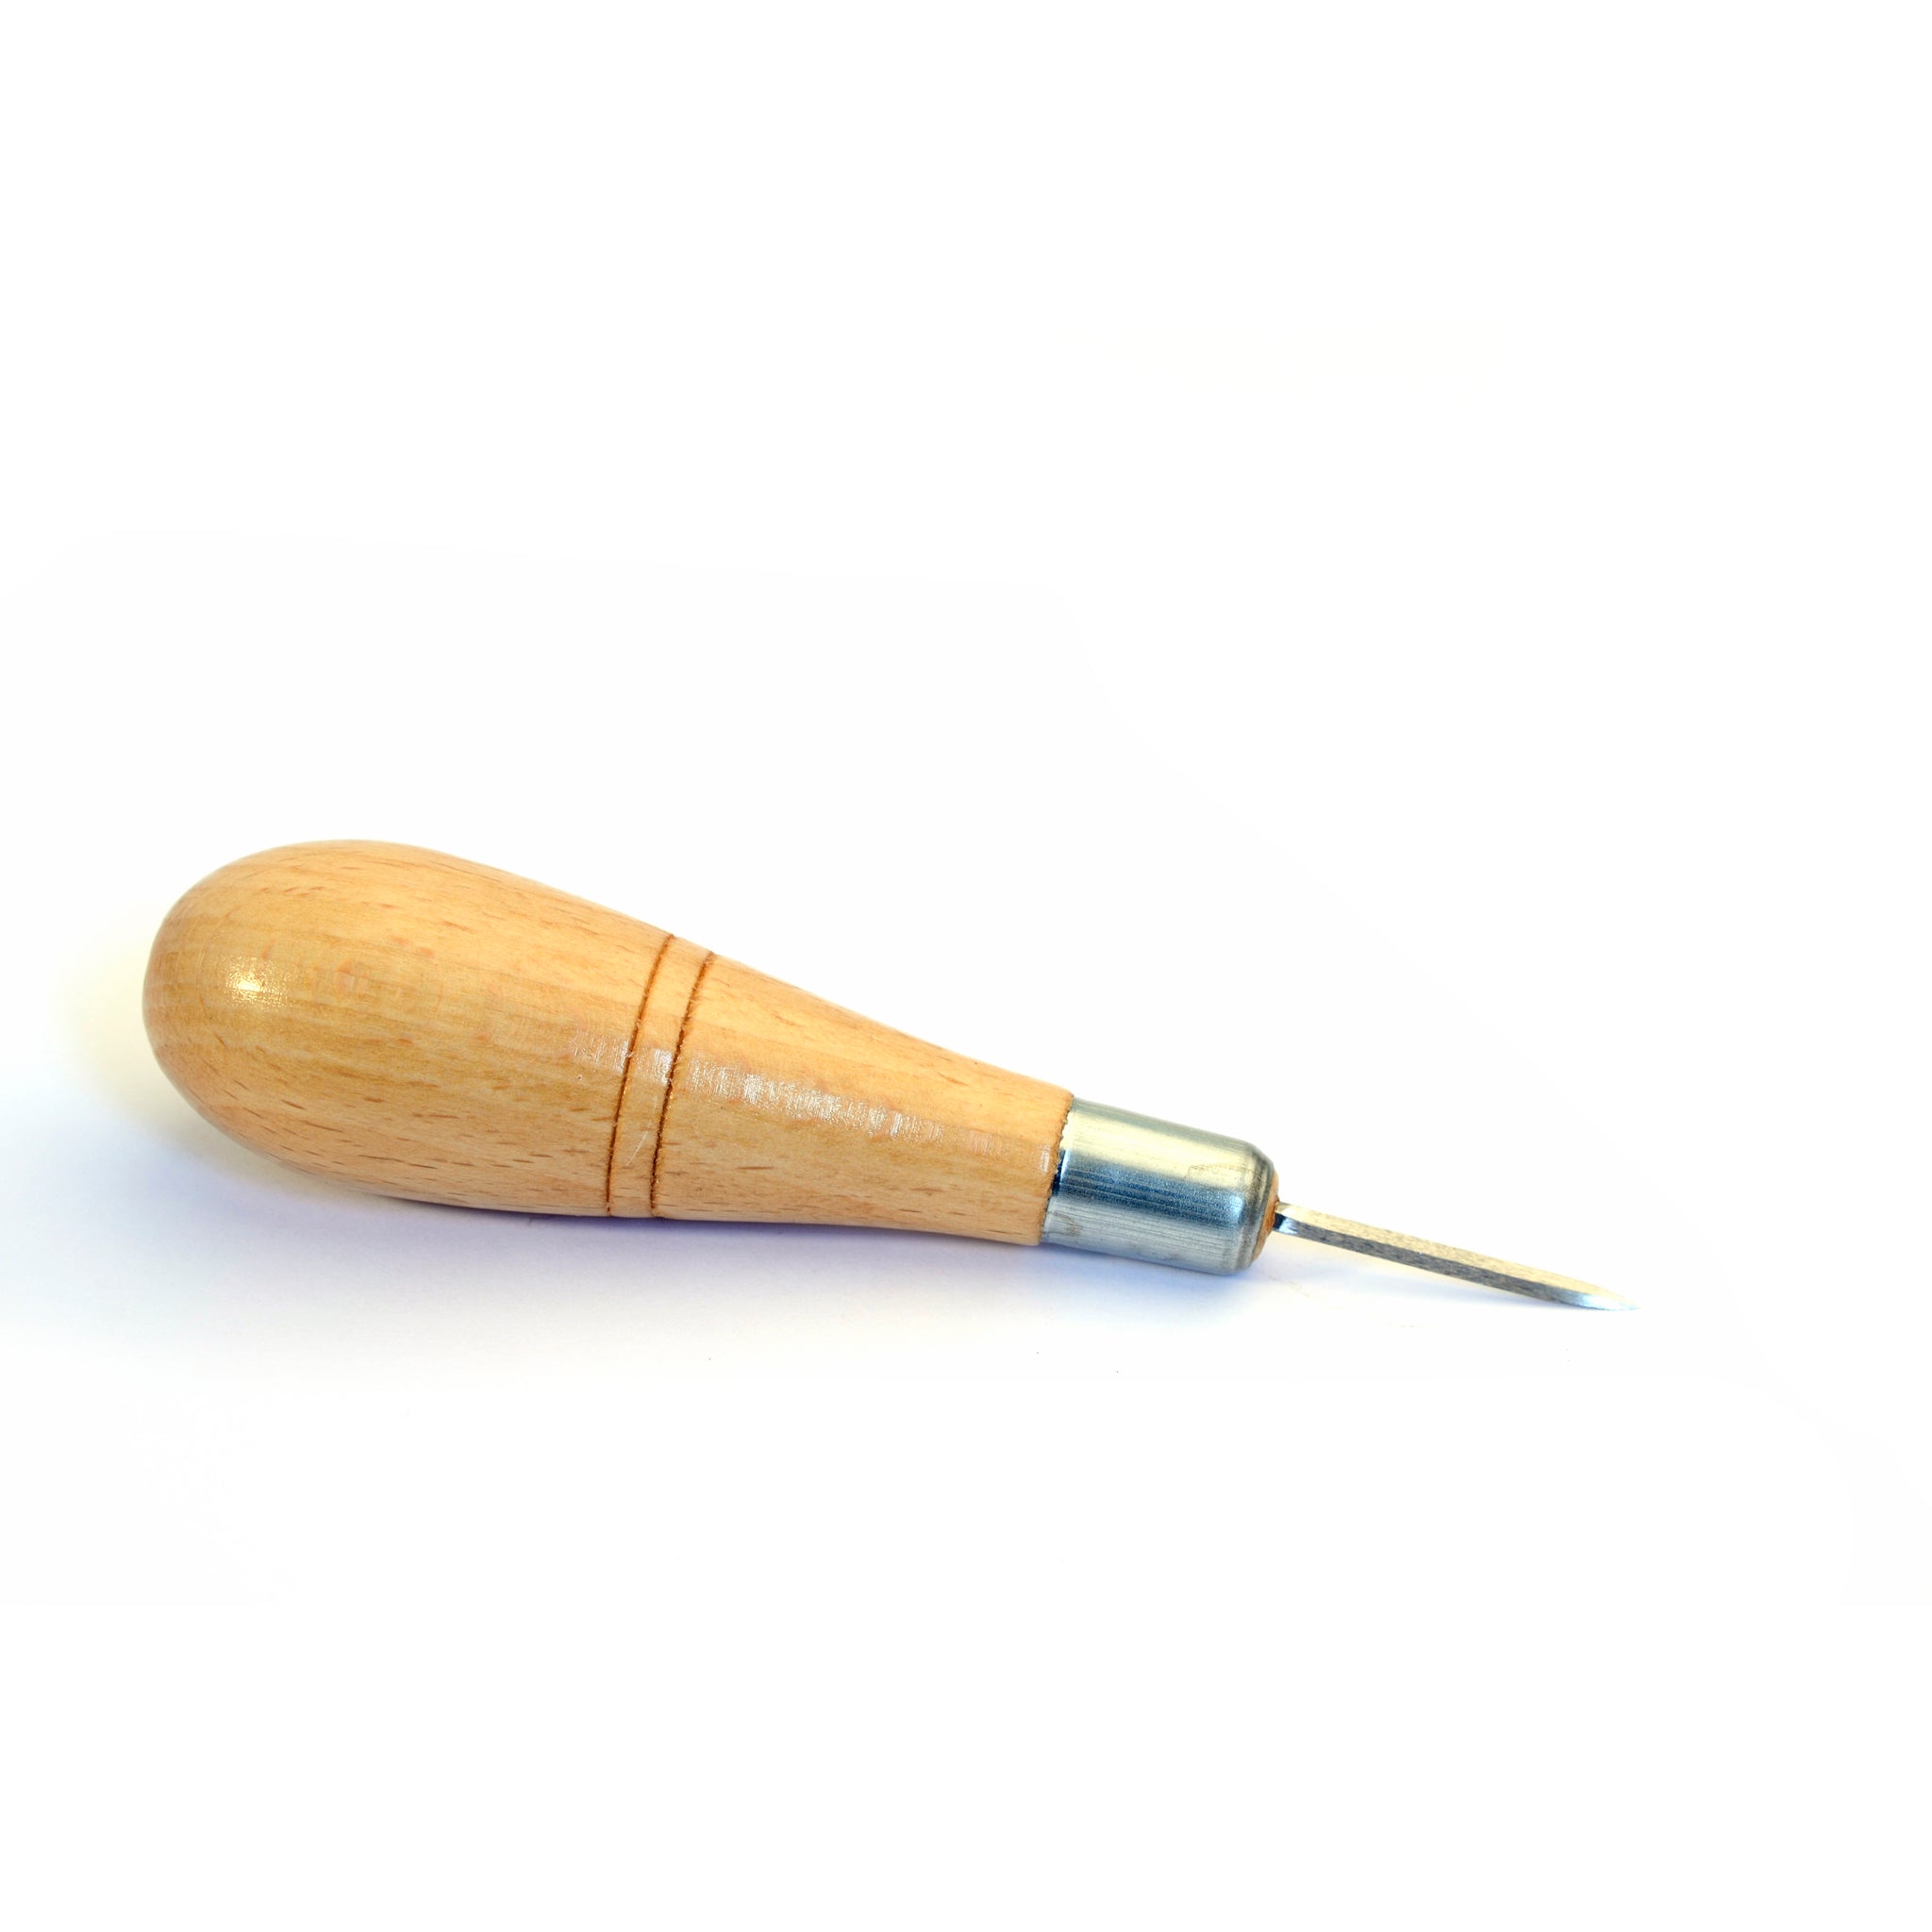 Wooden Awl Handle